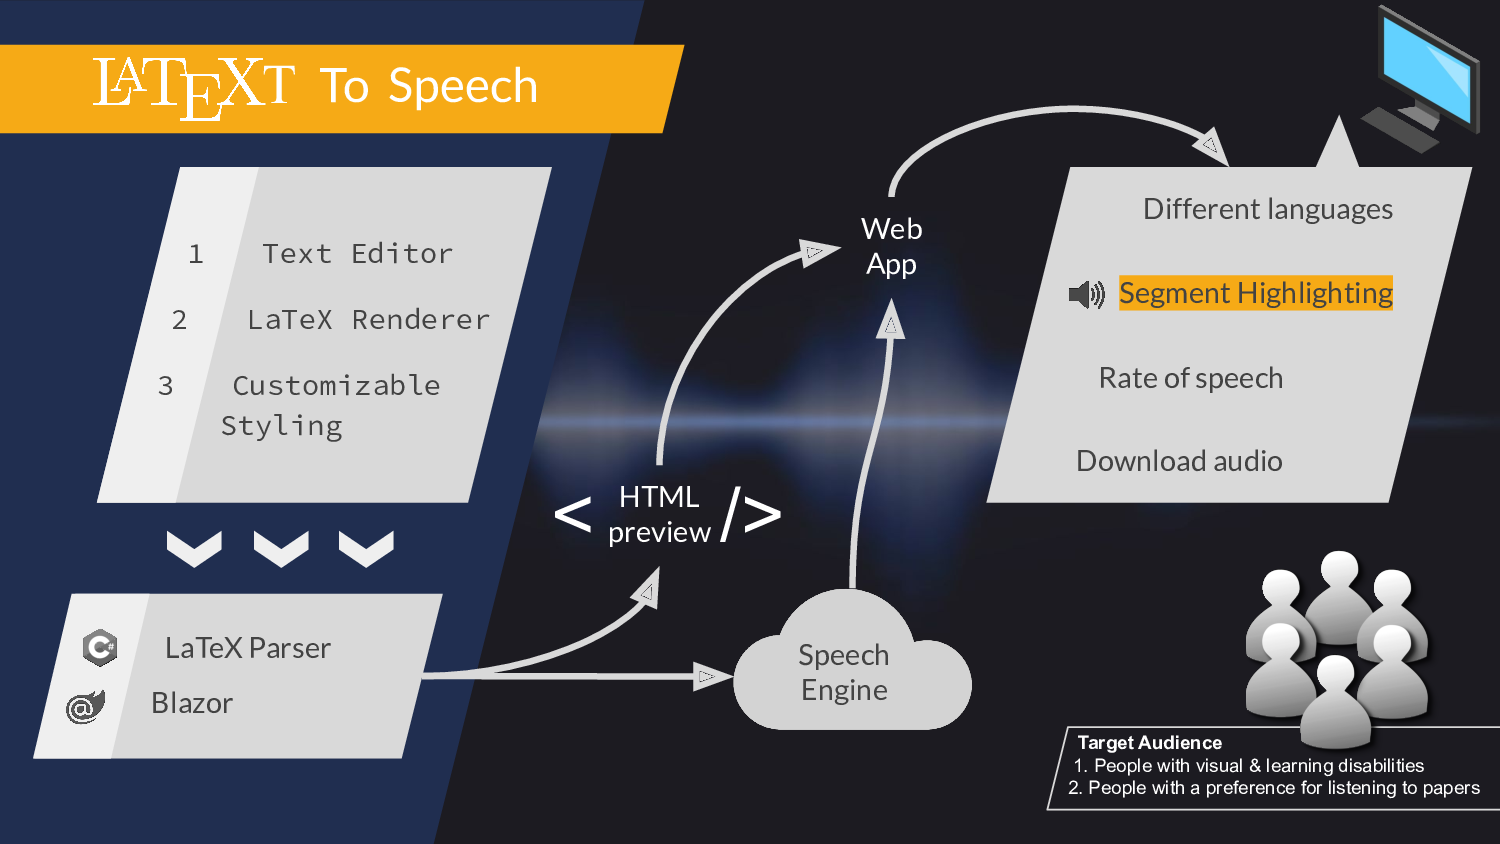 Poster, LaTeXt to Speech